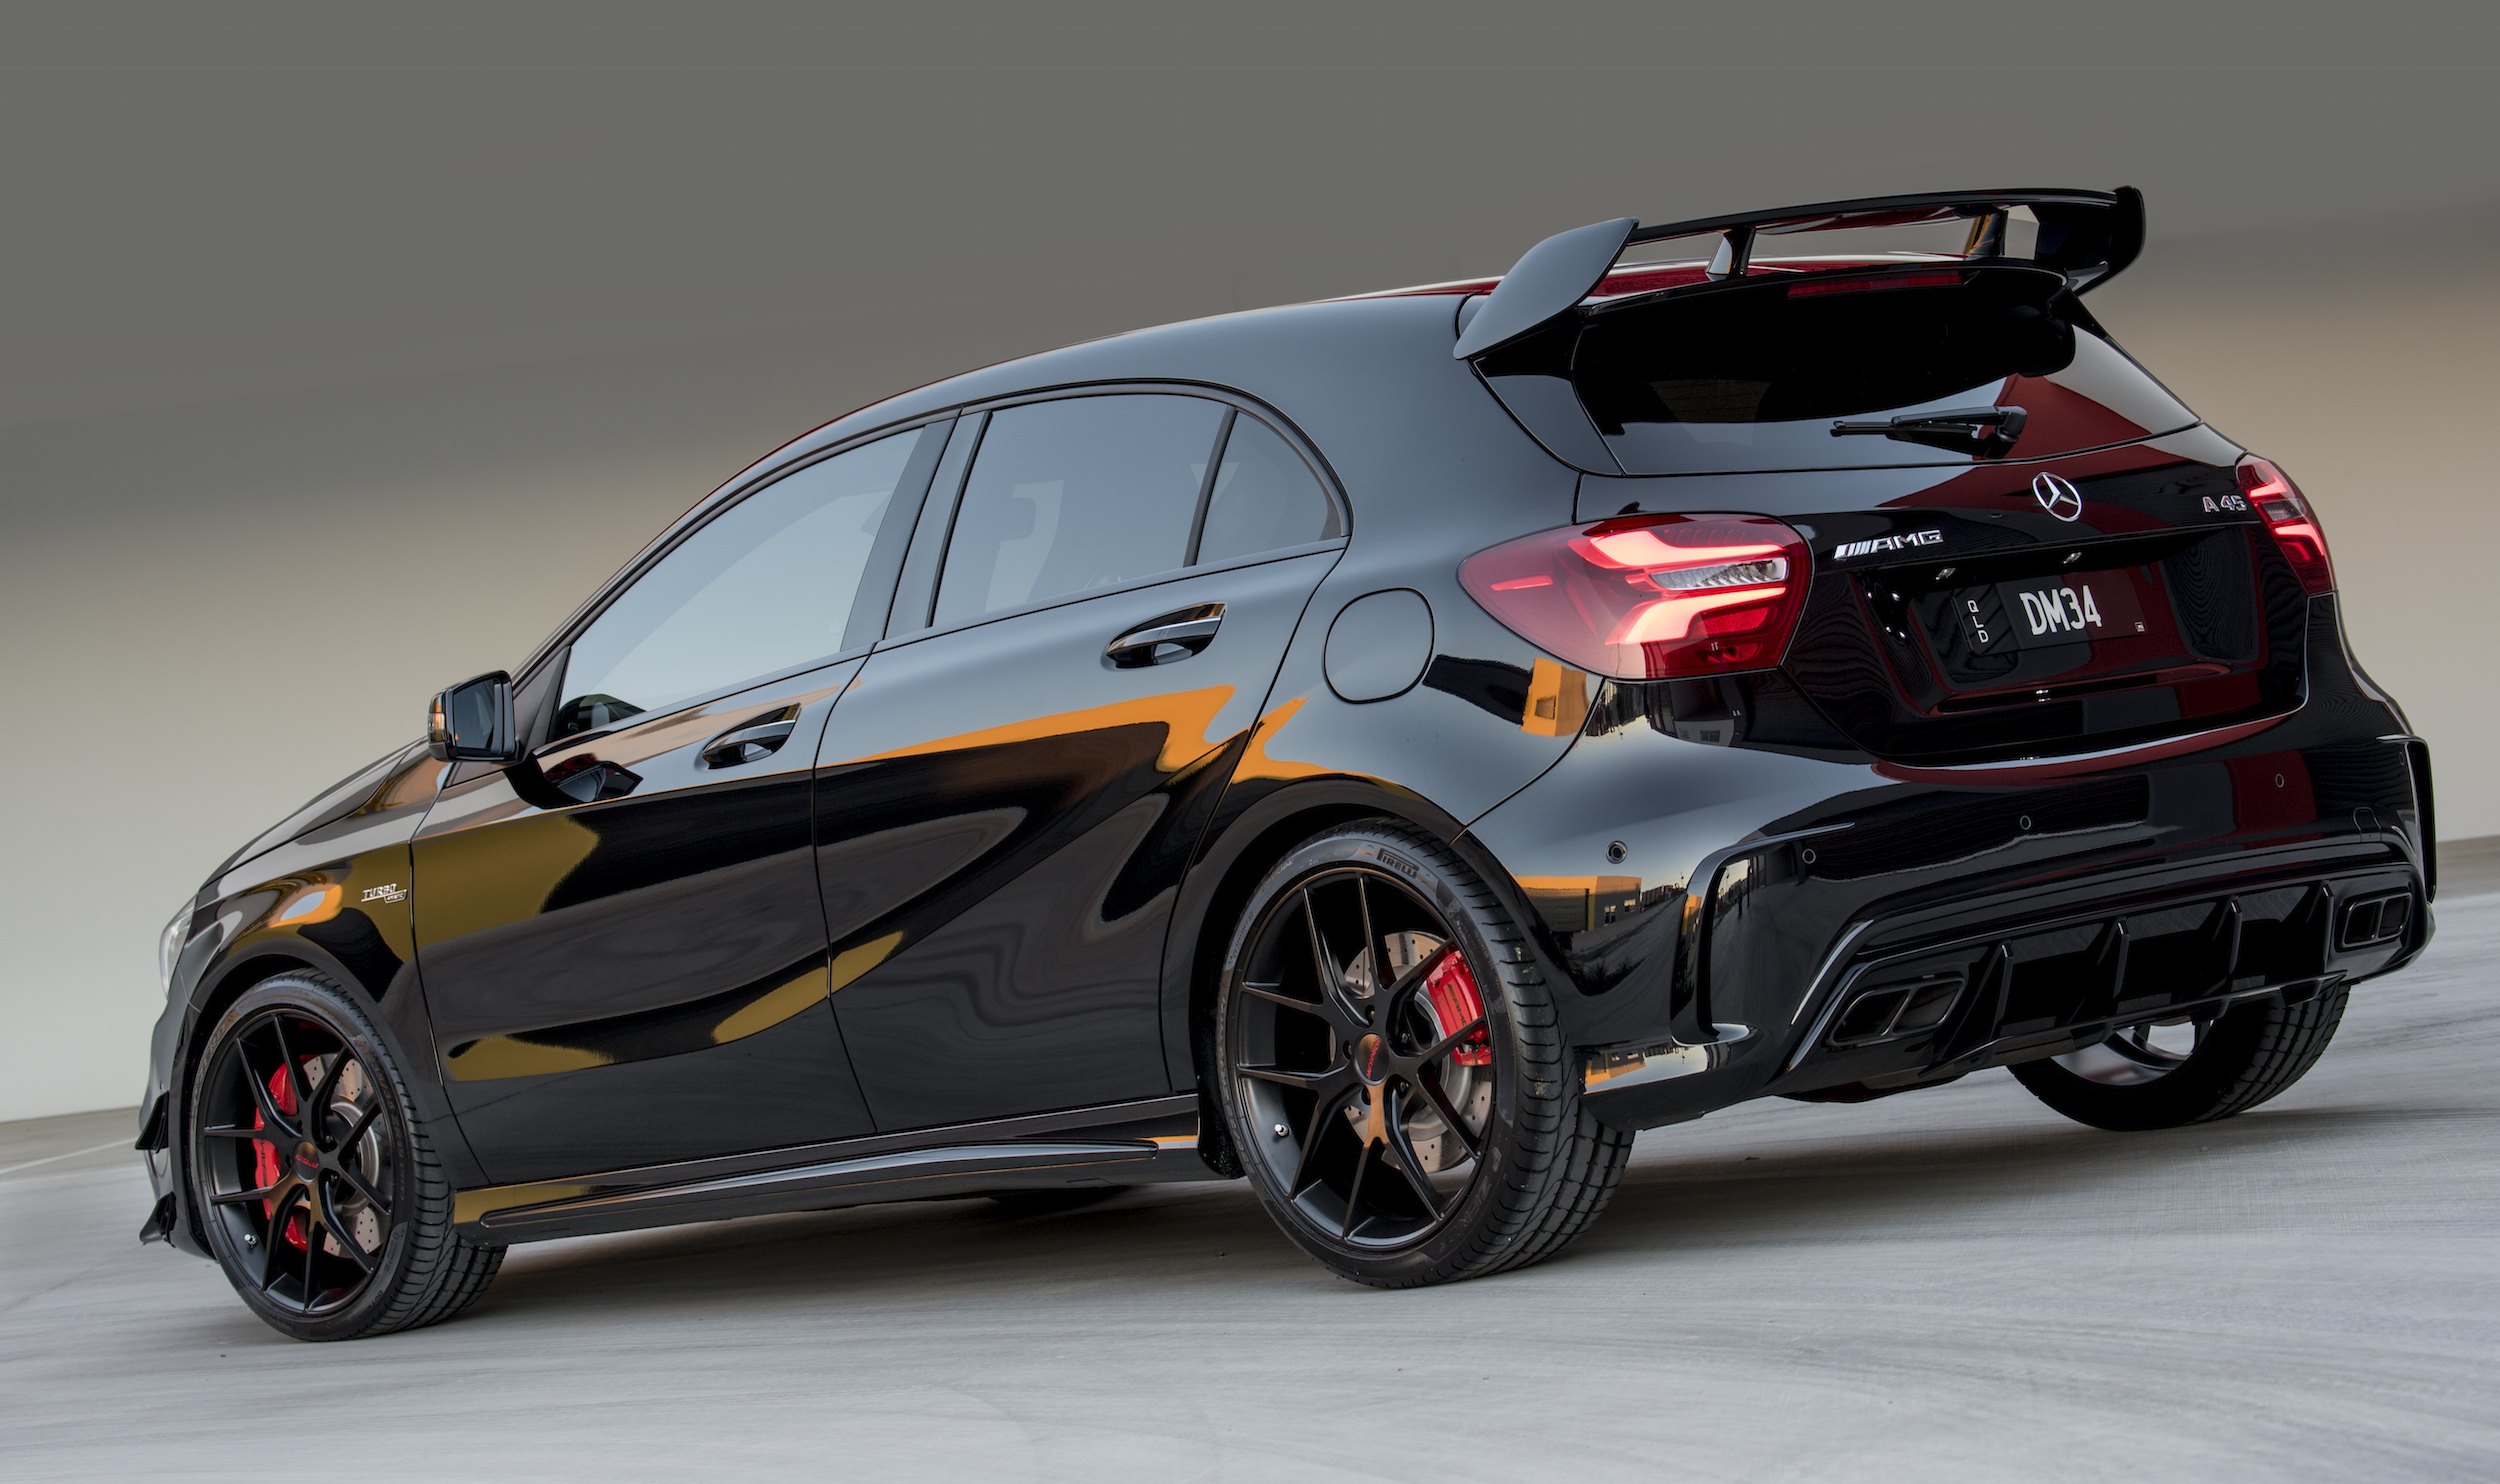 Black Mercedes A Class with Roofline Spoiler - Photo by Forgeline Motorsports